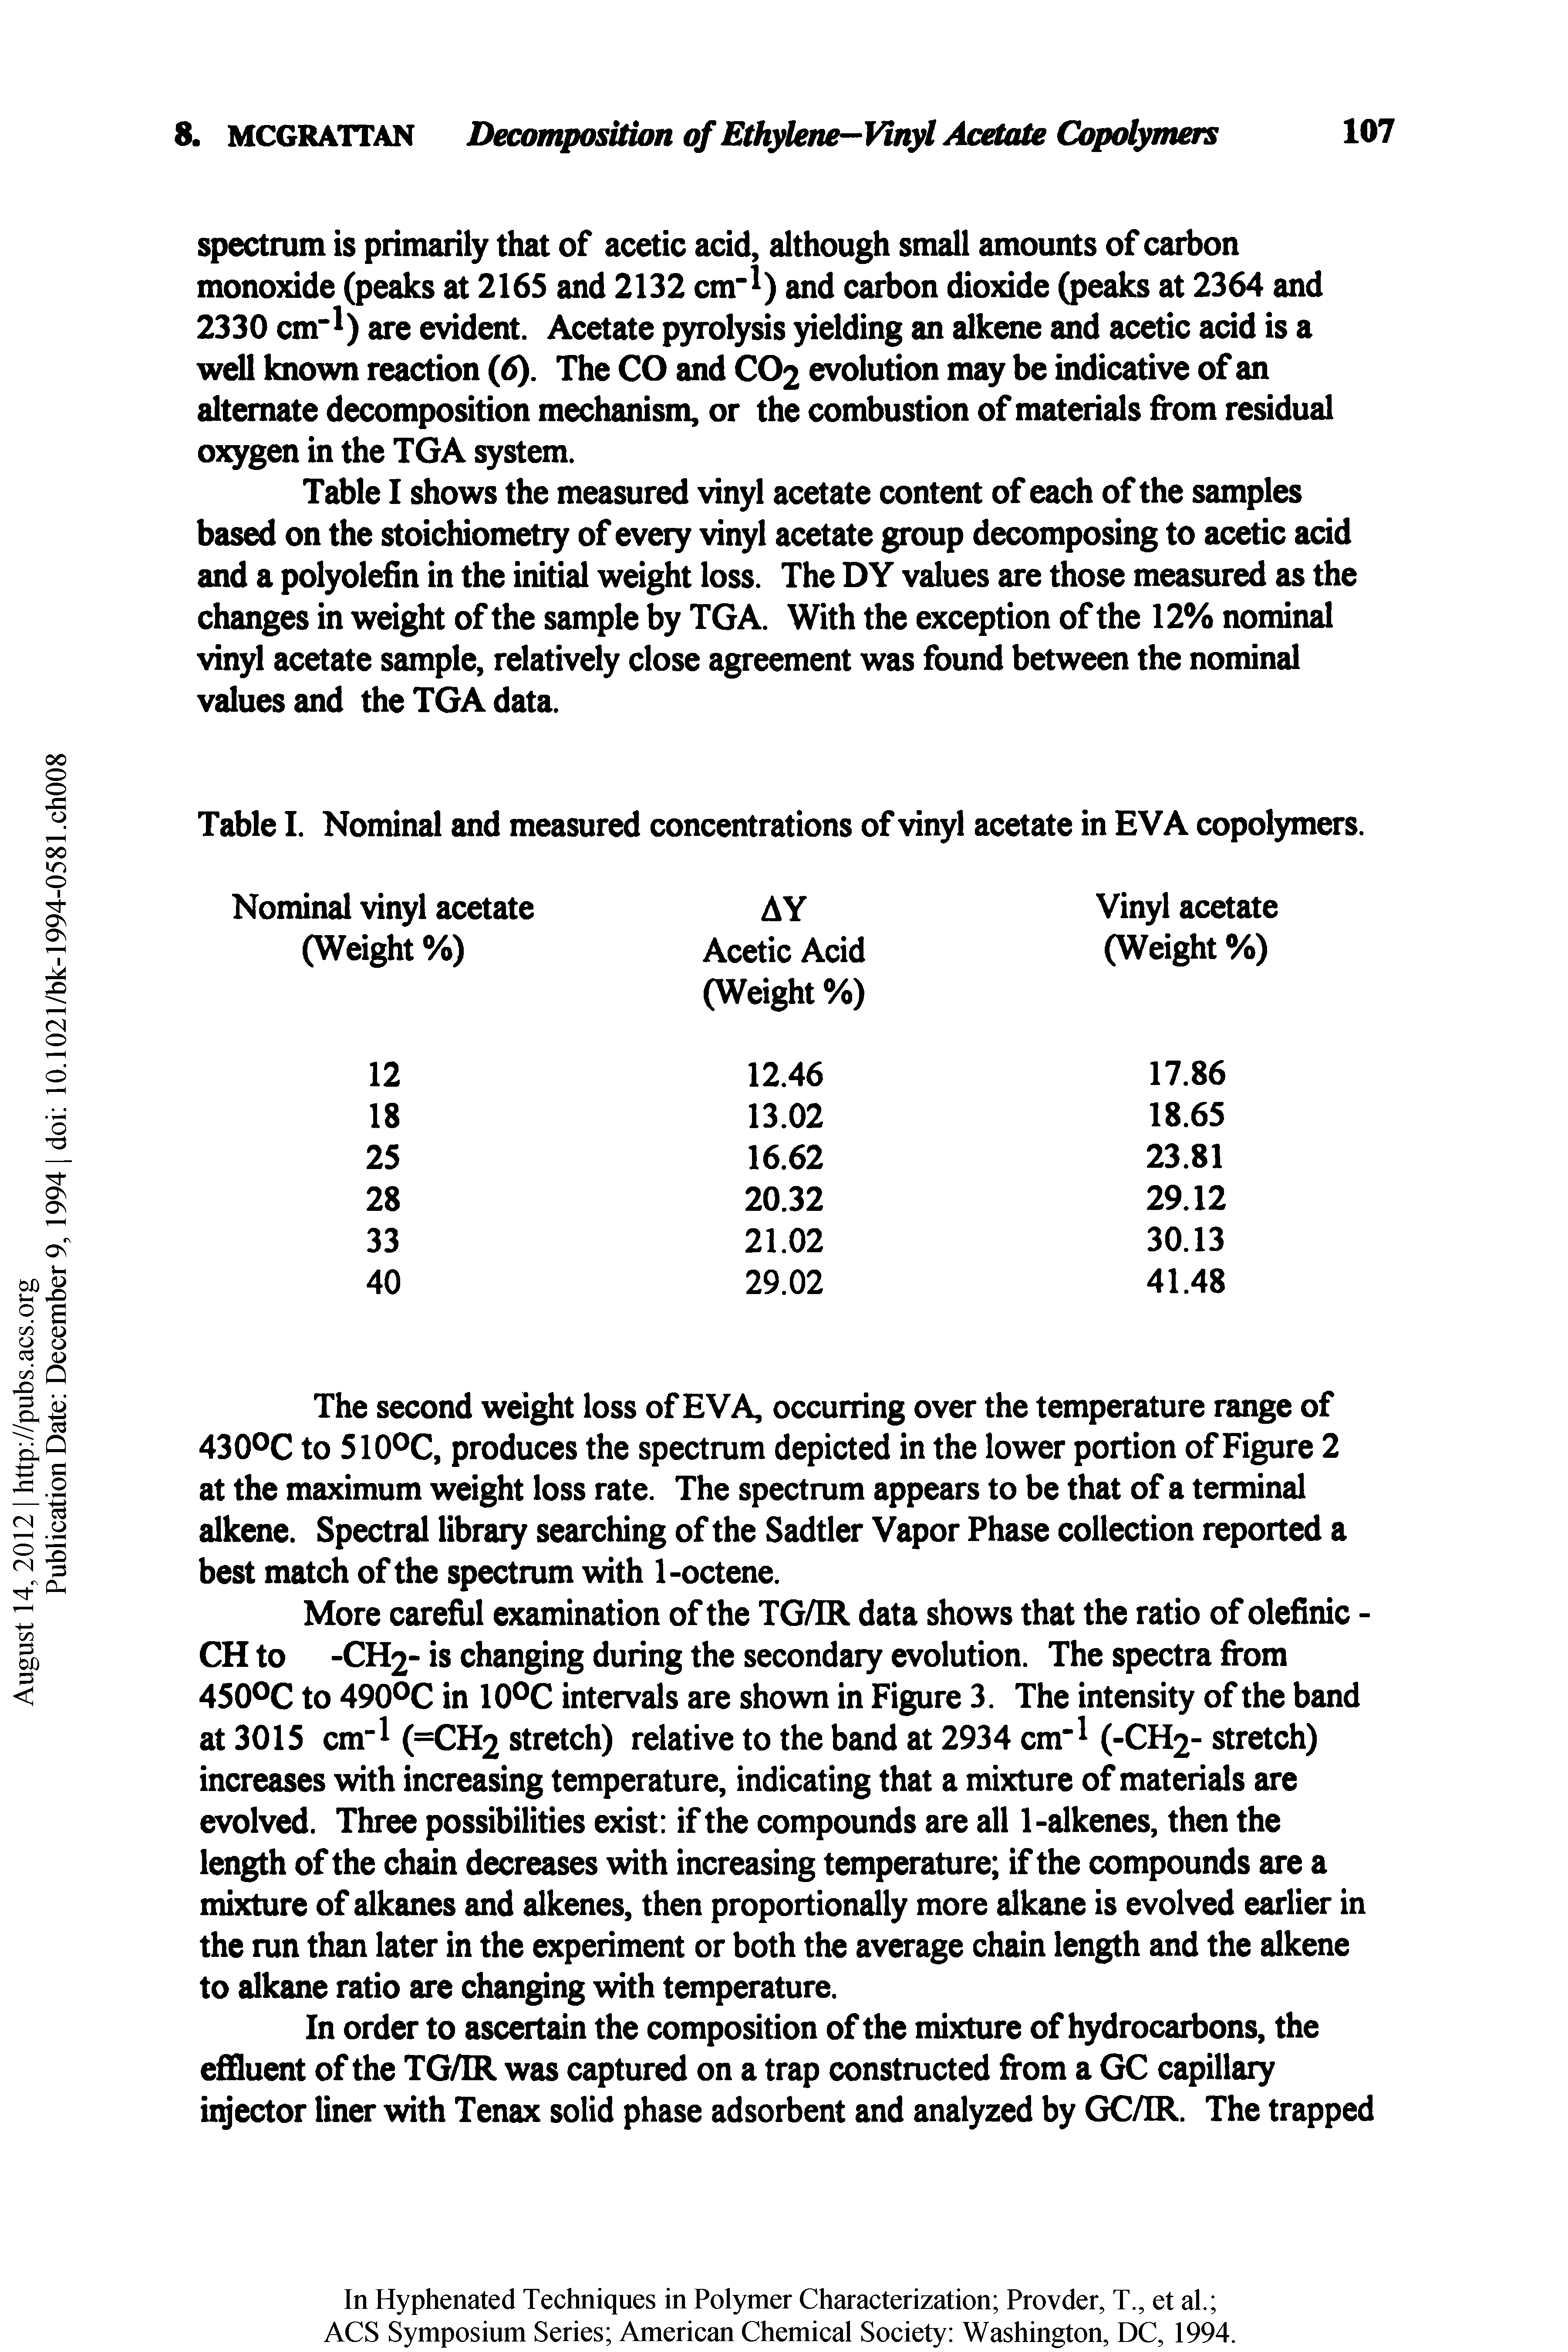 Table I shows the measured vinyl acetate content of each of the samples based on the stoichiometry of every vinyl acetate group decomposing to acetic acid and a polyolefin in the initial weight loss. The DY values are those measured as the changes in weight of the sample by TGA. With the exception of the 12% nominal vinyl acetate sample, relatively close agreement was found between the nominal values and the TGA data.